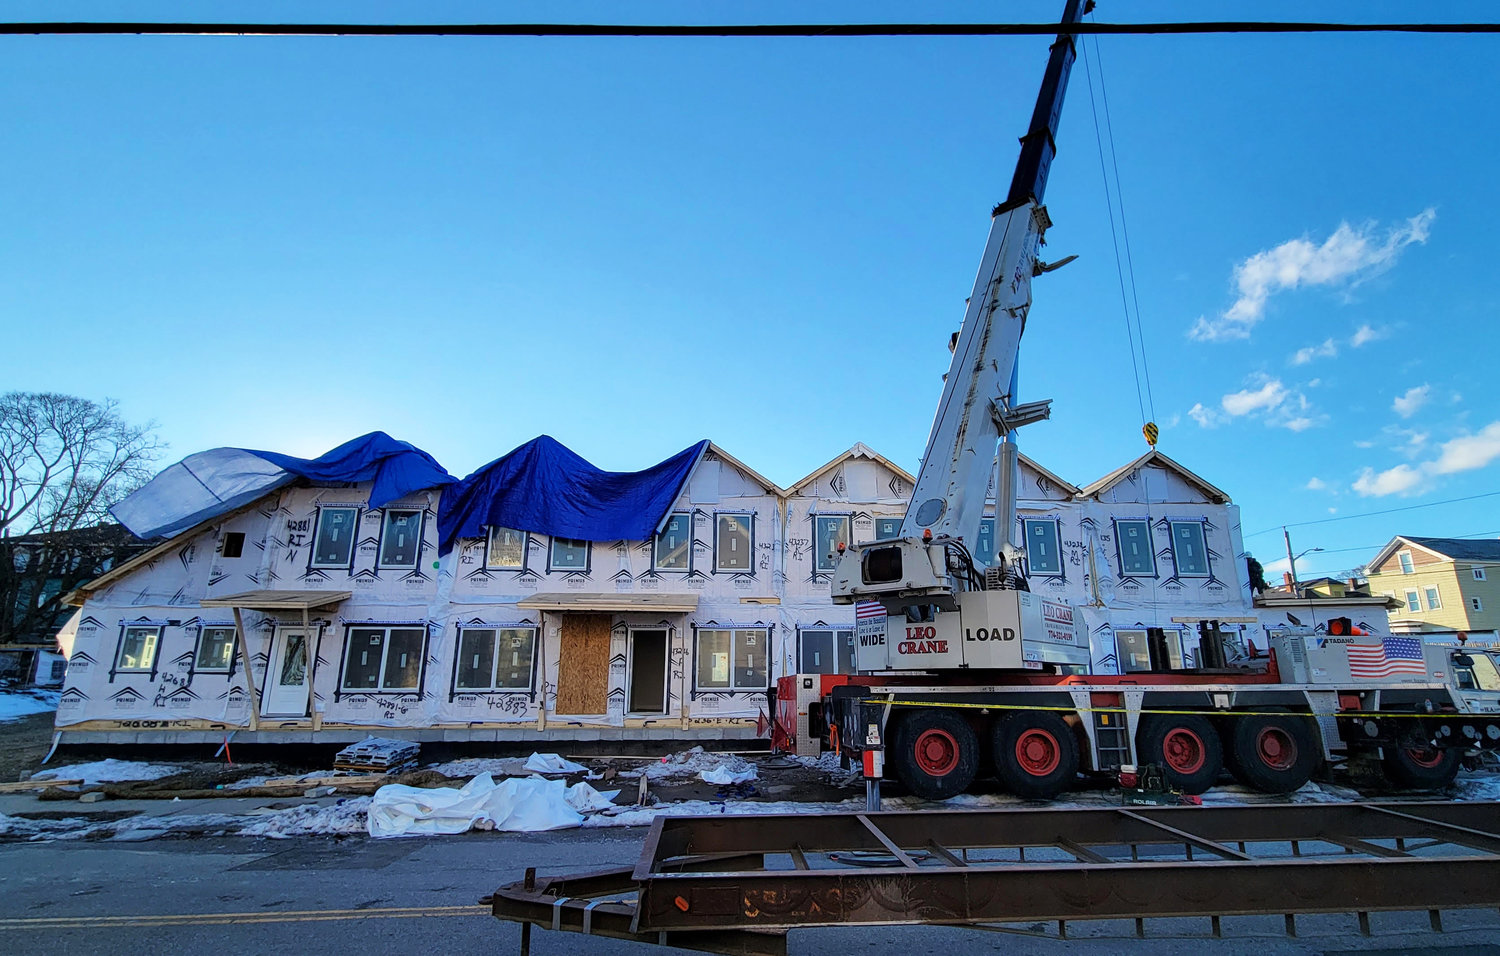 A crane lowers a modular unit into place at the Bowdoin Street site. The eight modular units of affordable housing are expected to be ready for occupancy in May.